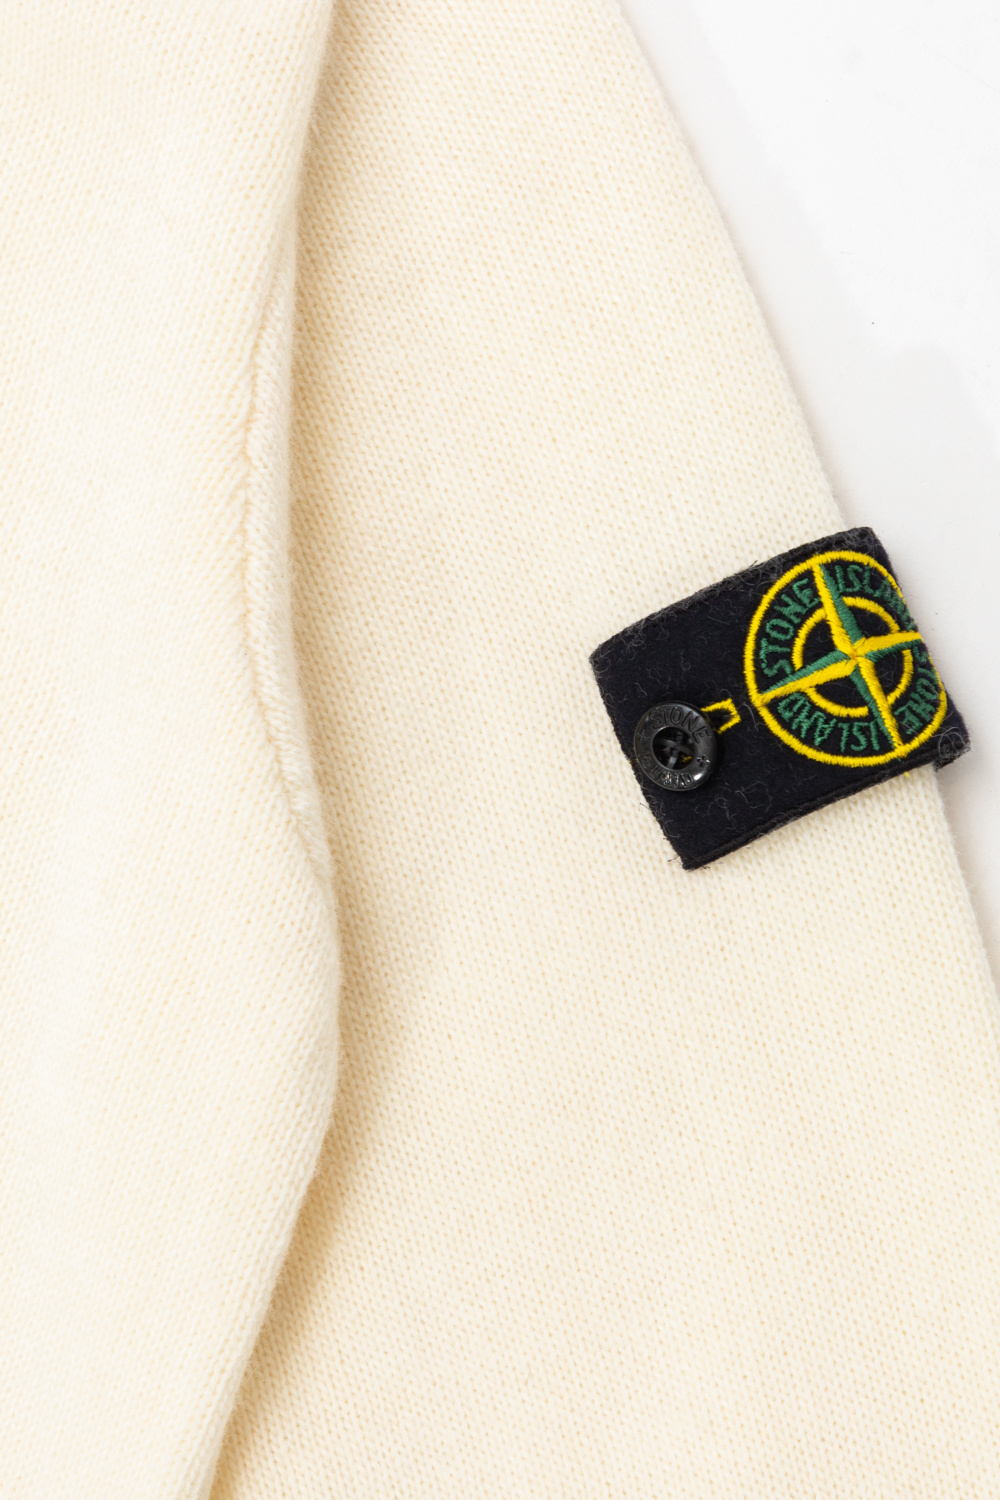 Stone Island Kids Discover the collection